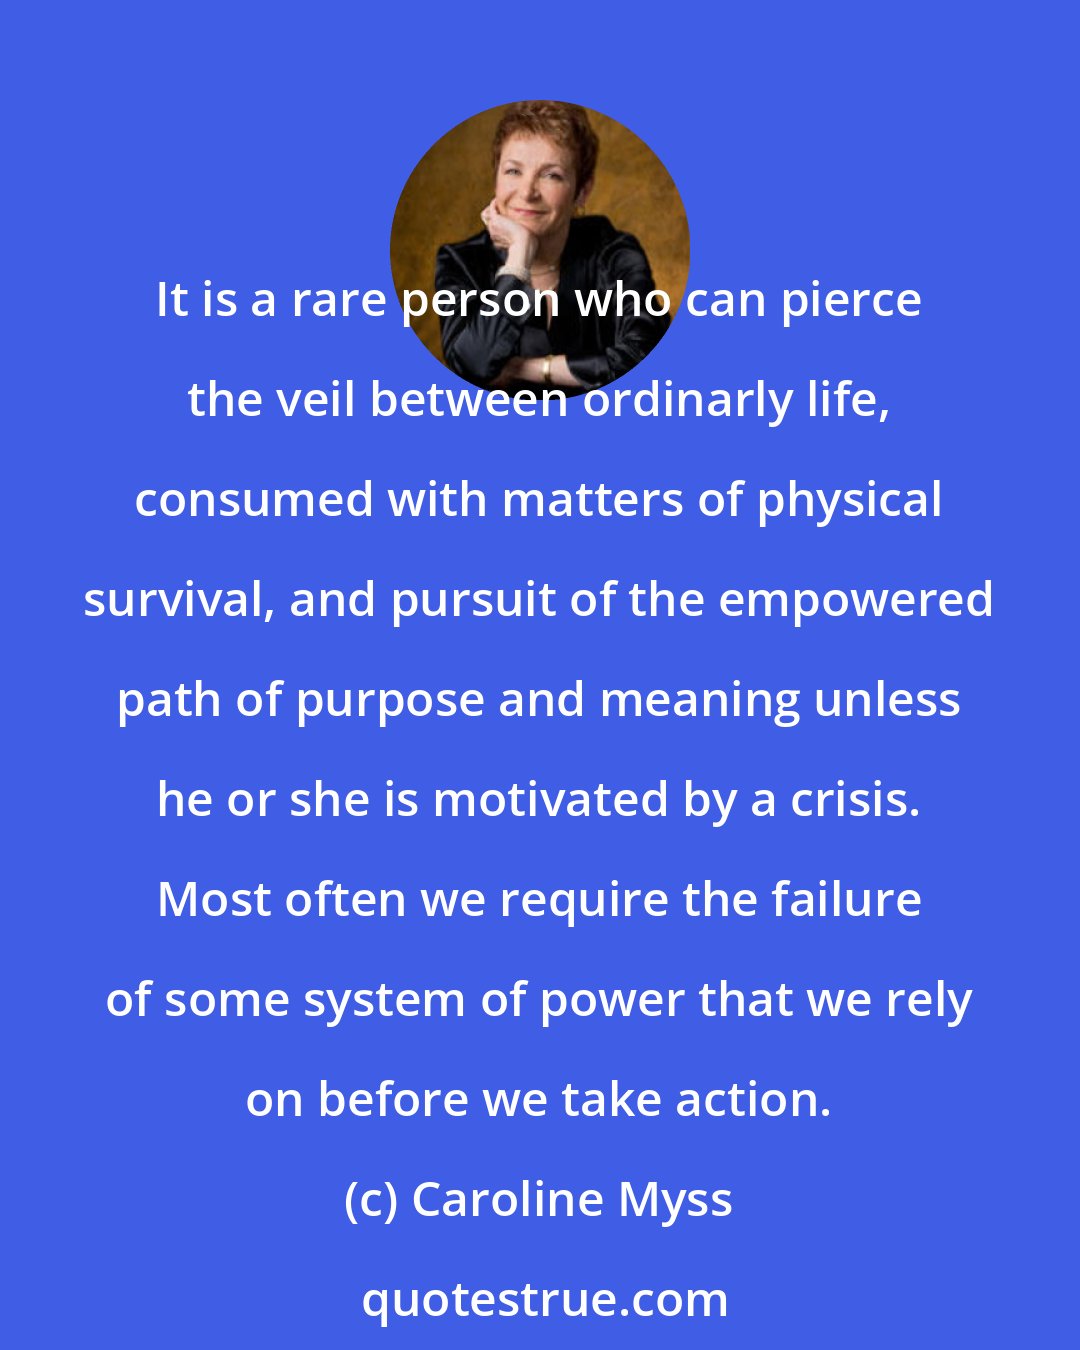 Caroline Myss: It is a rare person who can pierce the veil between ordinarly life, consumed with matters of physical survival, and pursuit of the empowered path of purpose and meaning unless he or she is motivated by a crisis. Most often we require the failure of some system of power that we rely on before we take action.